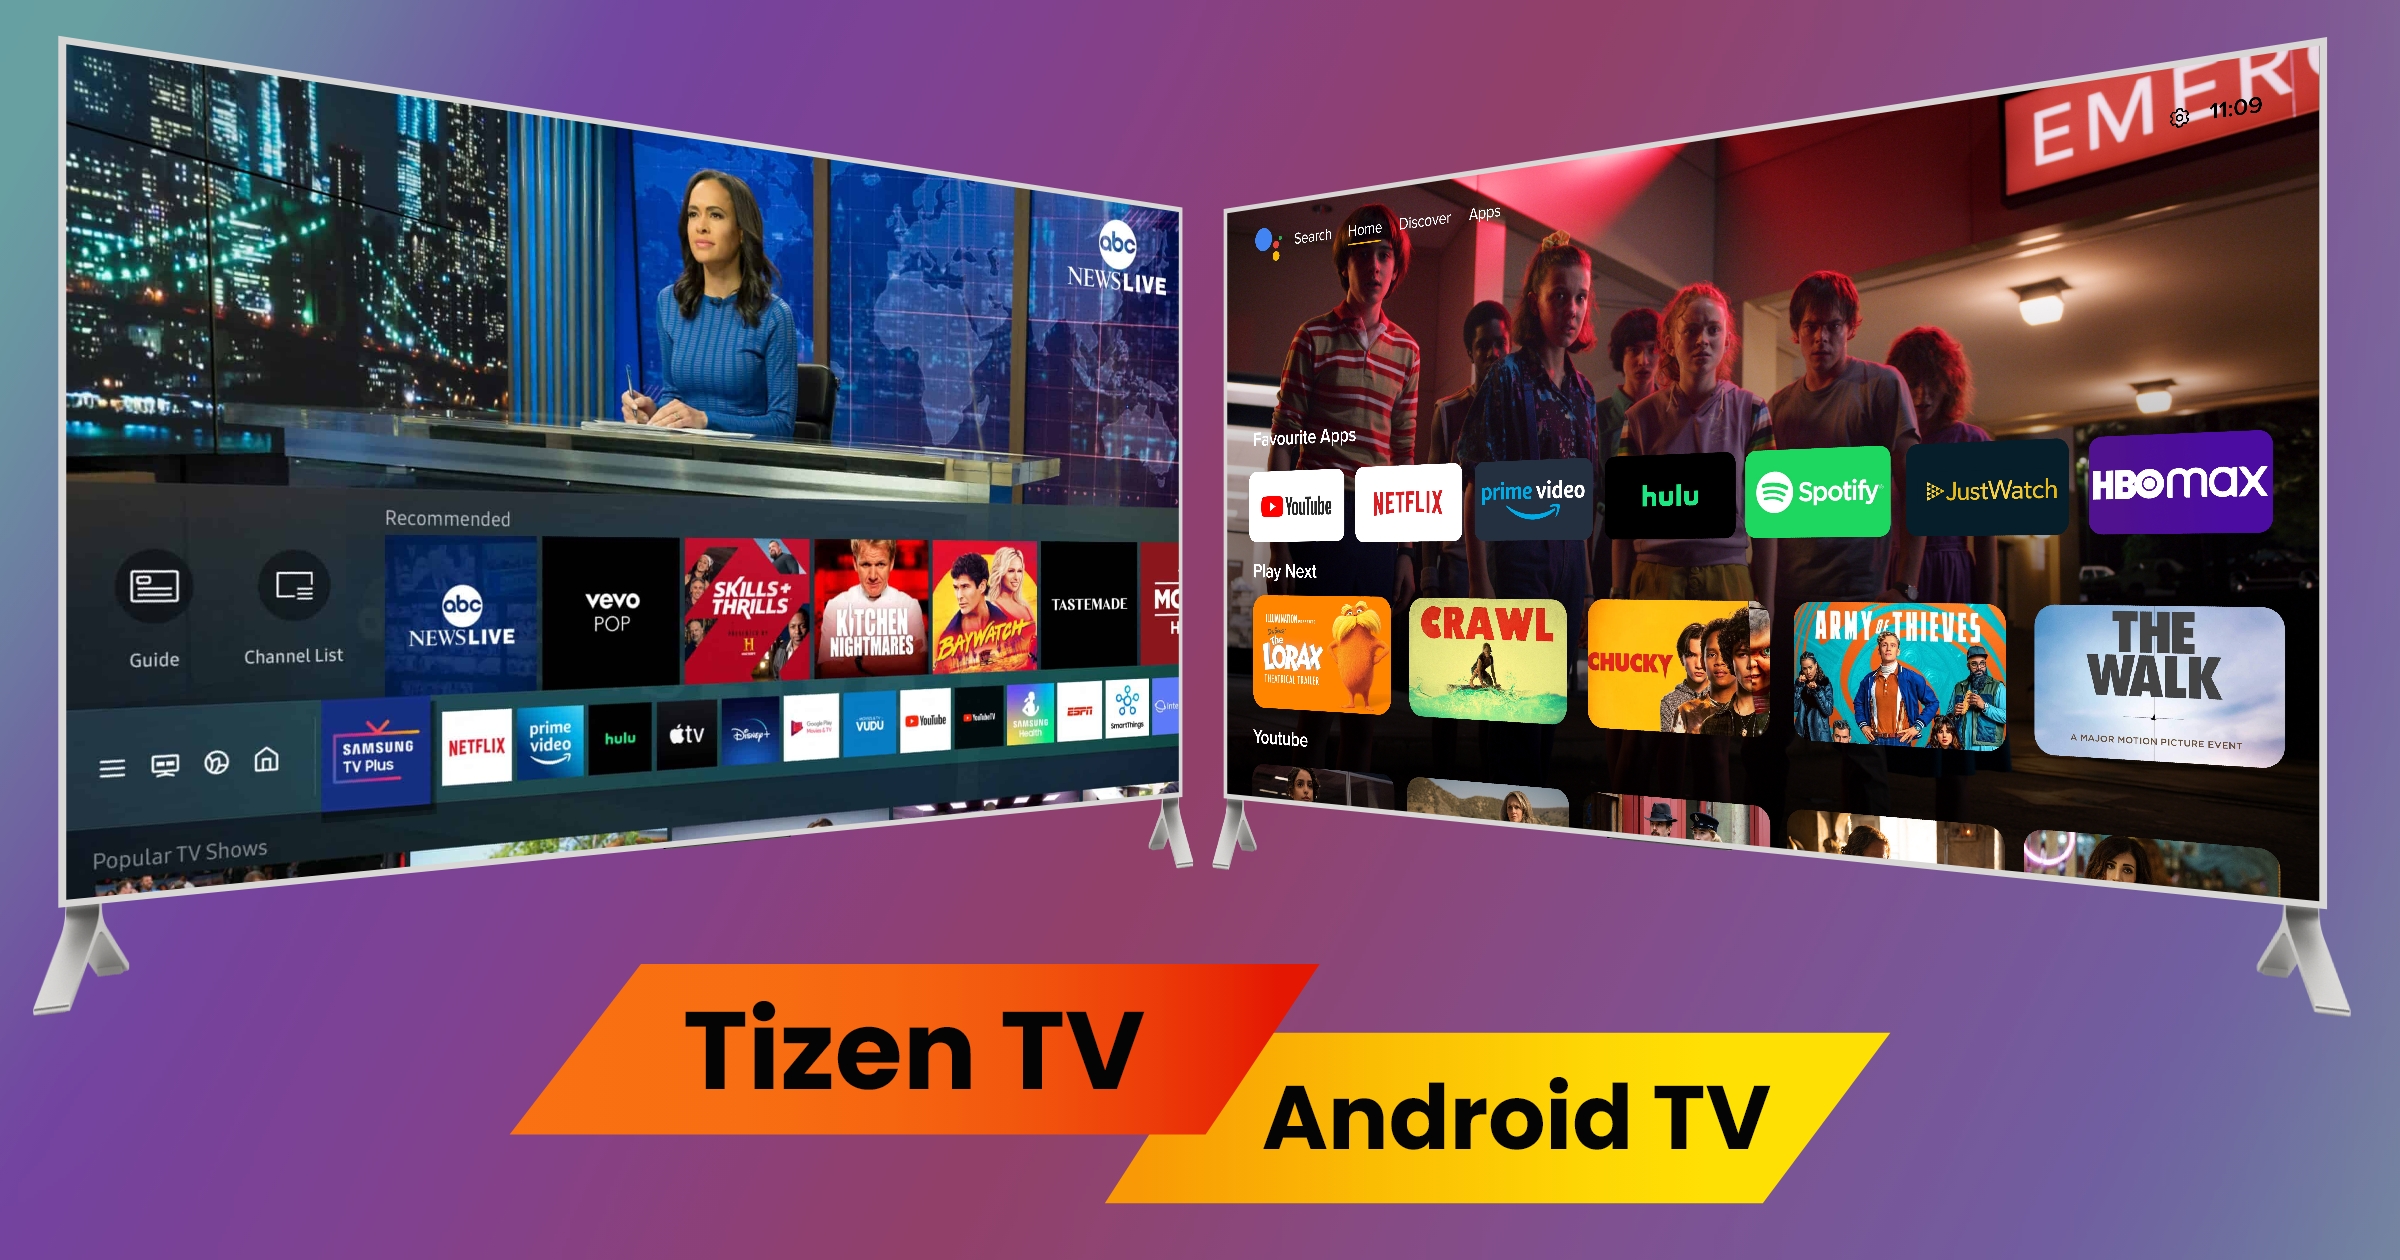 Smart TV vs Android TV: Which is Better